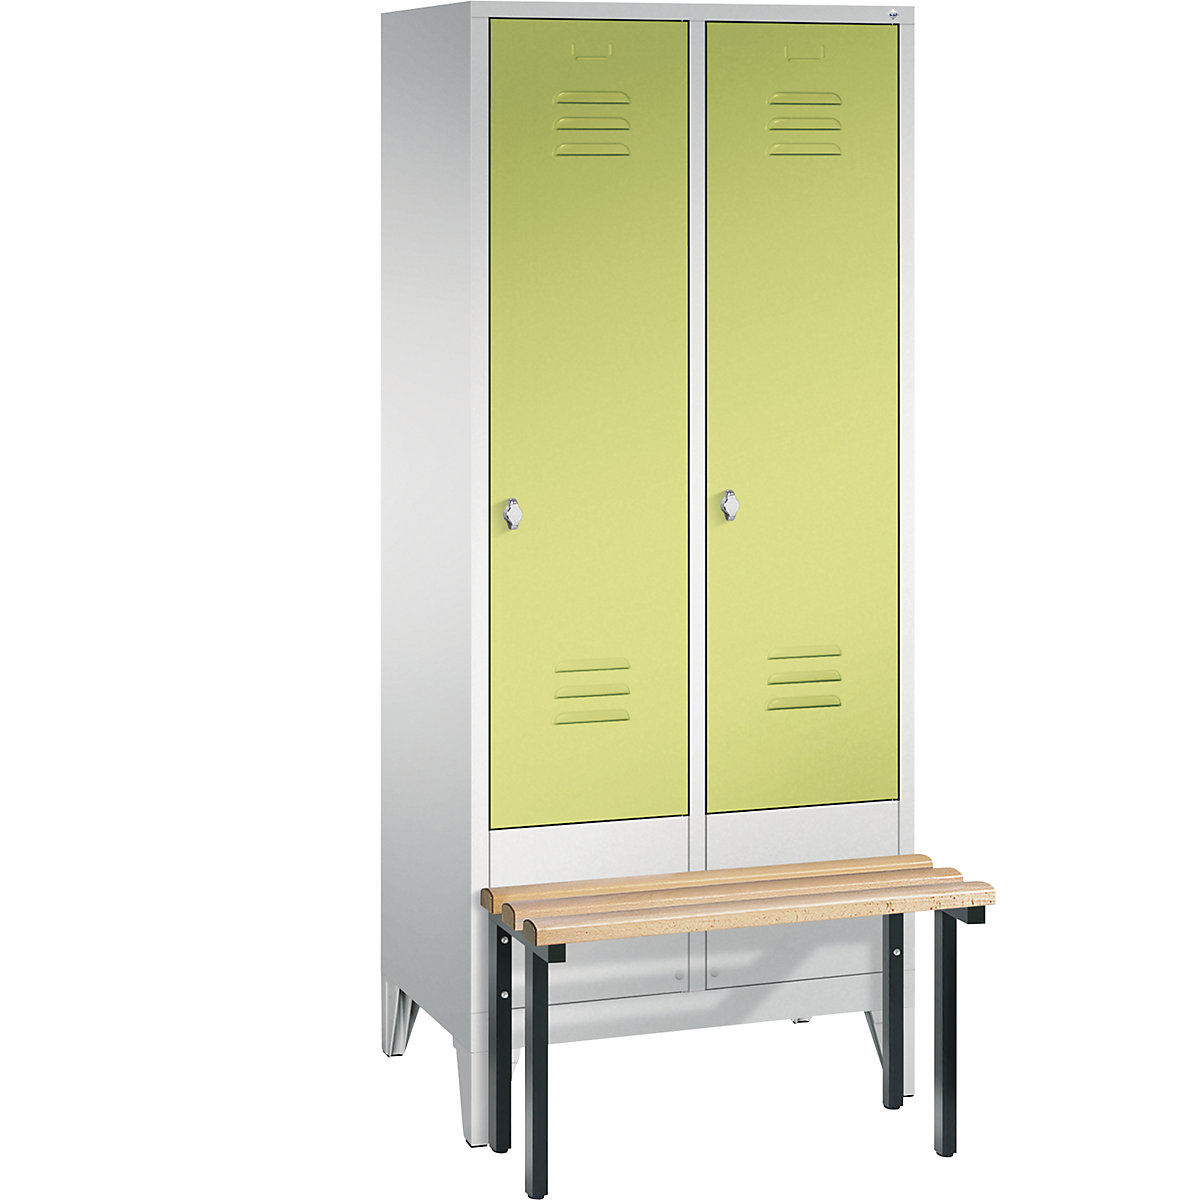 CLASSIC cloakroom locker with bench mounted in front – C+P, 2 compartments, compartment width 400 mm, light grey / viridian green-8